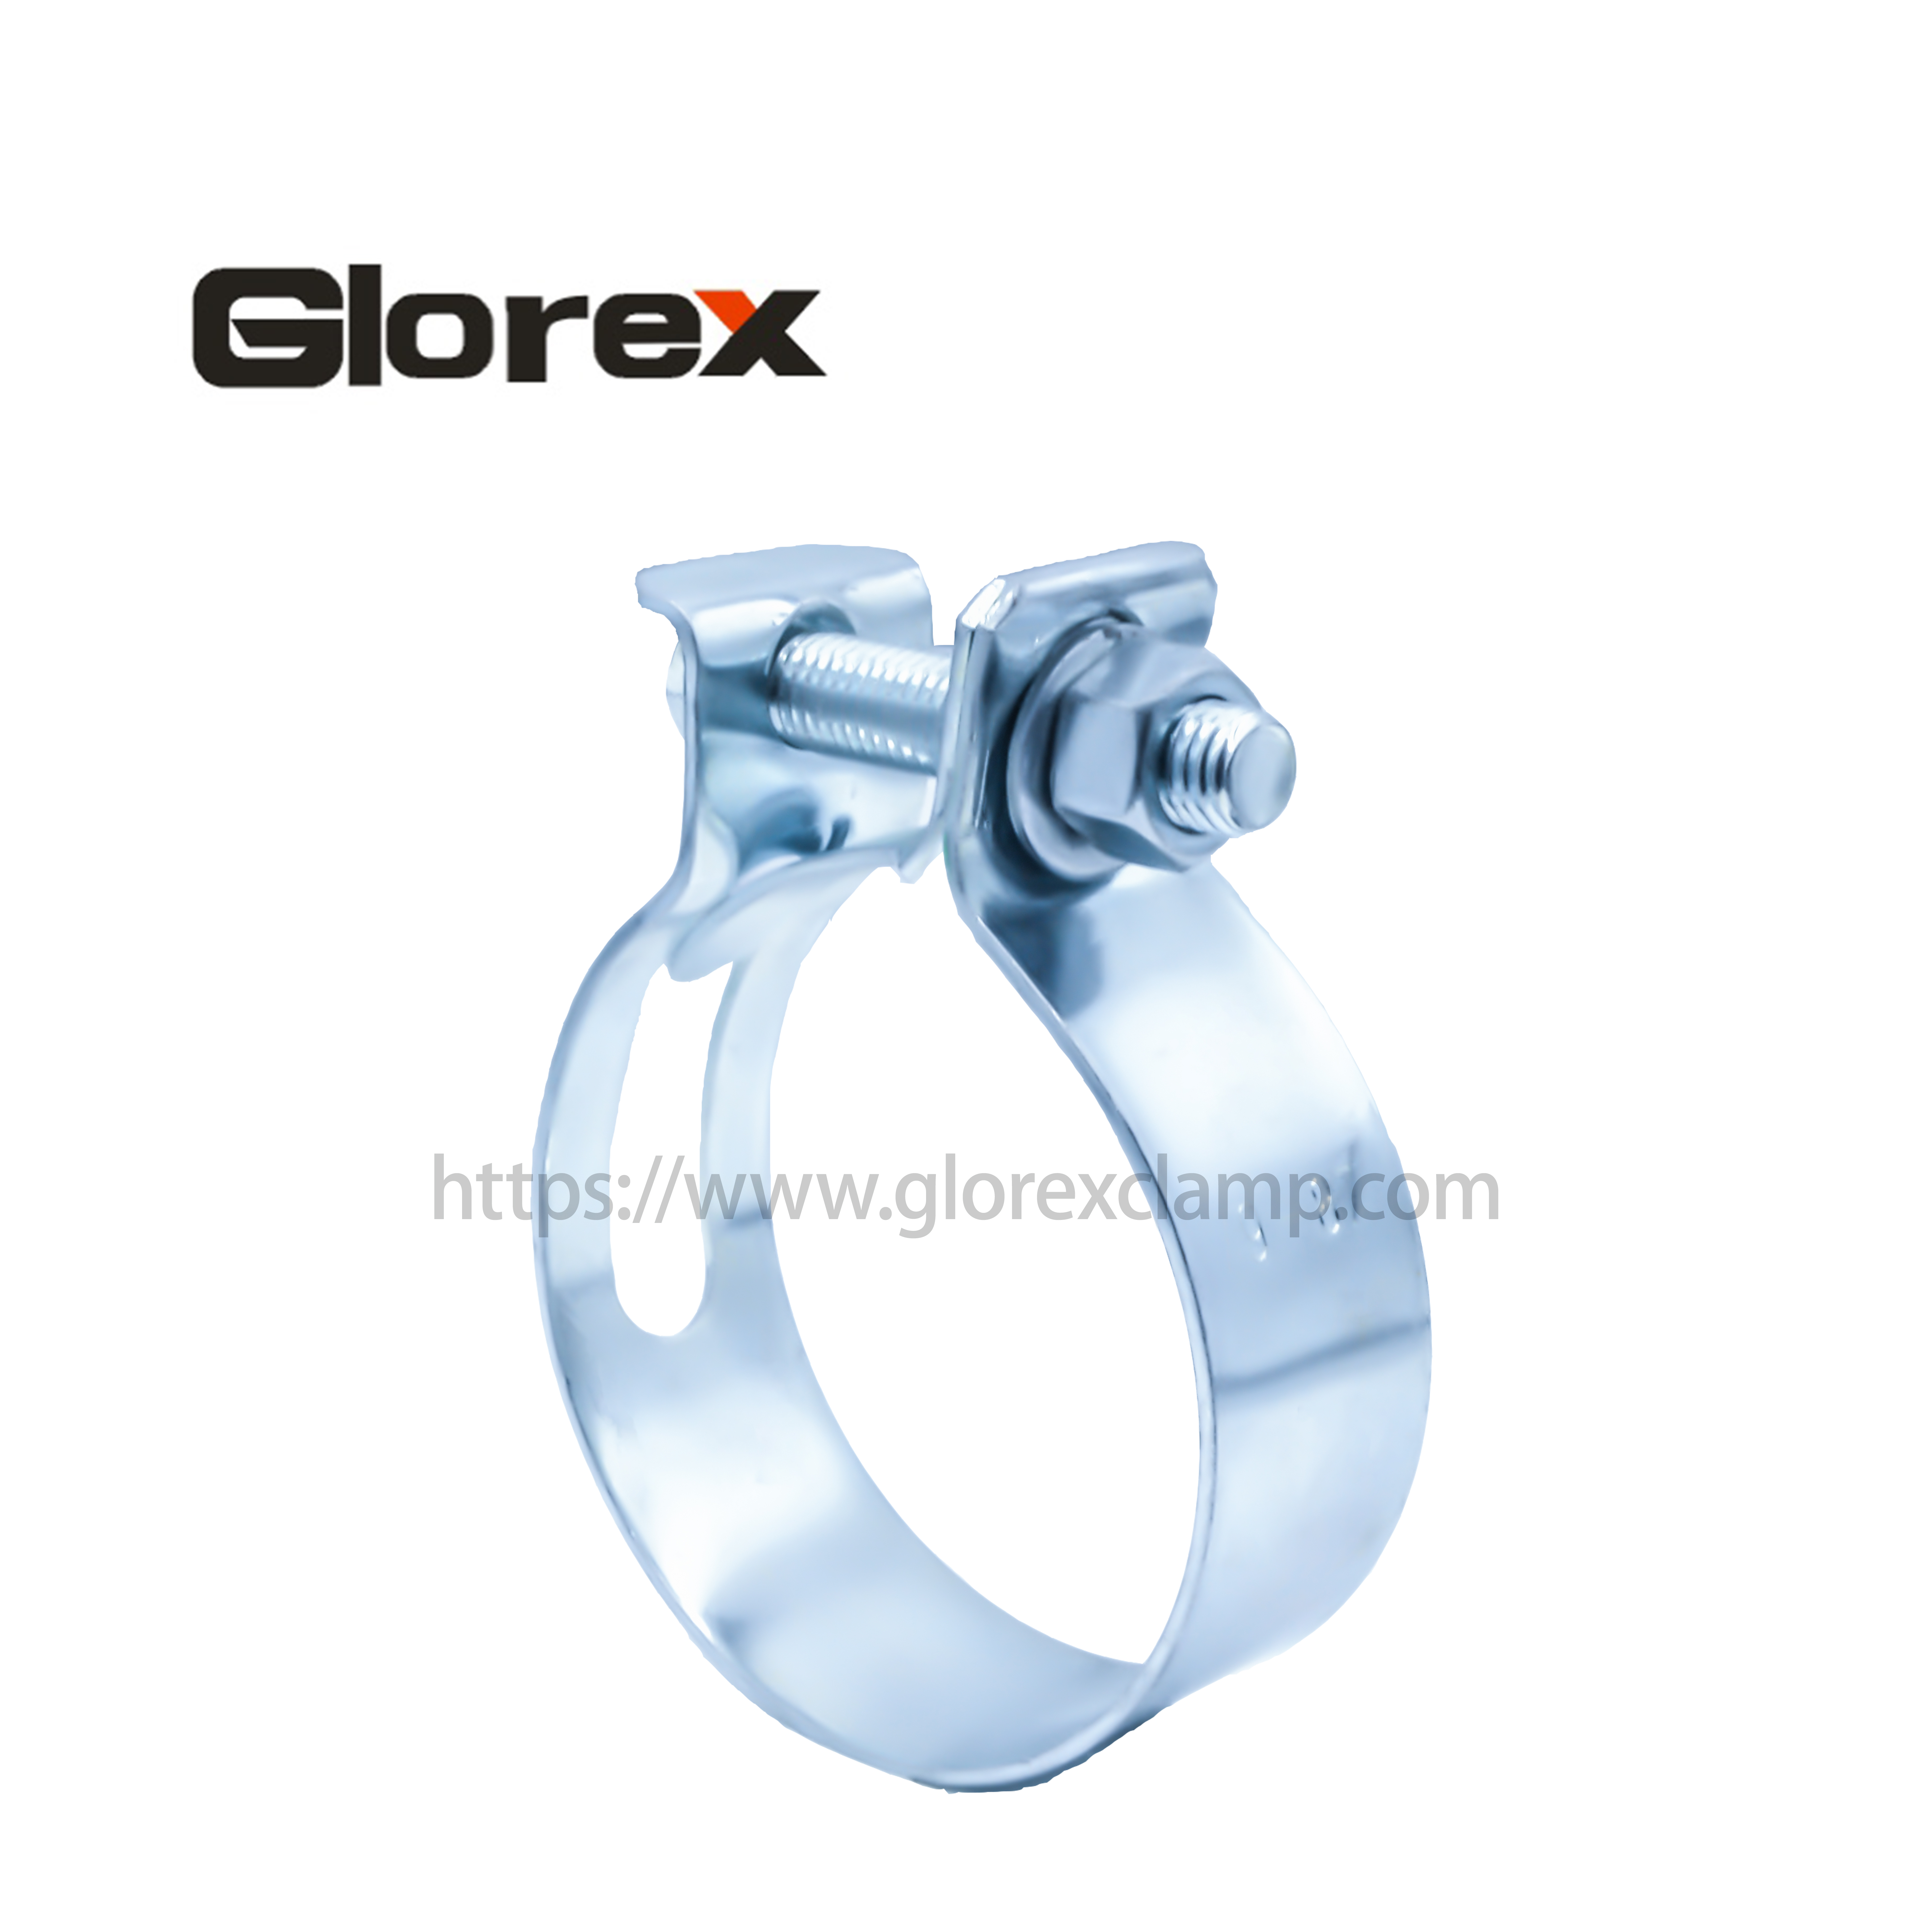 Special Design for Duty Clamp - The bay-type clamp – Glorex